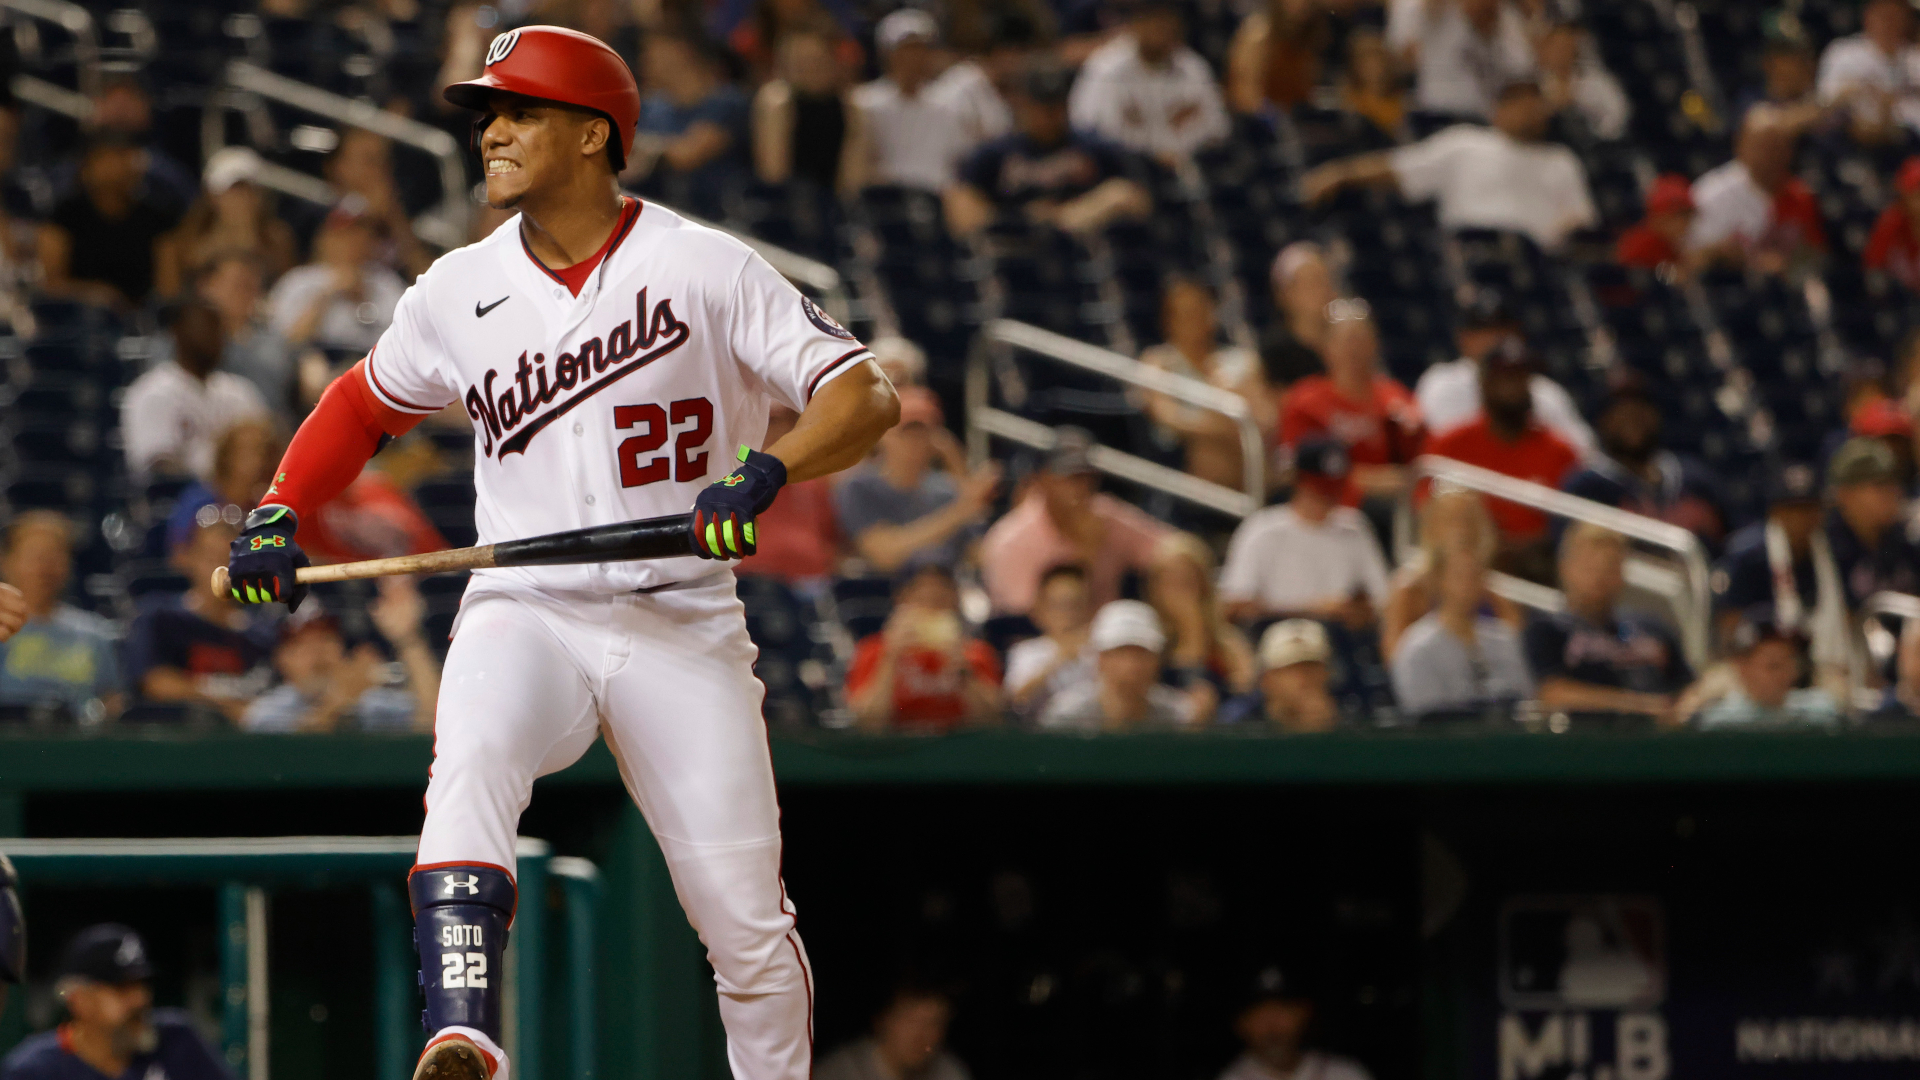 Loss to Braves Was Just a Footnote in Nationals' Bad Day at the Ballpark